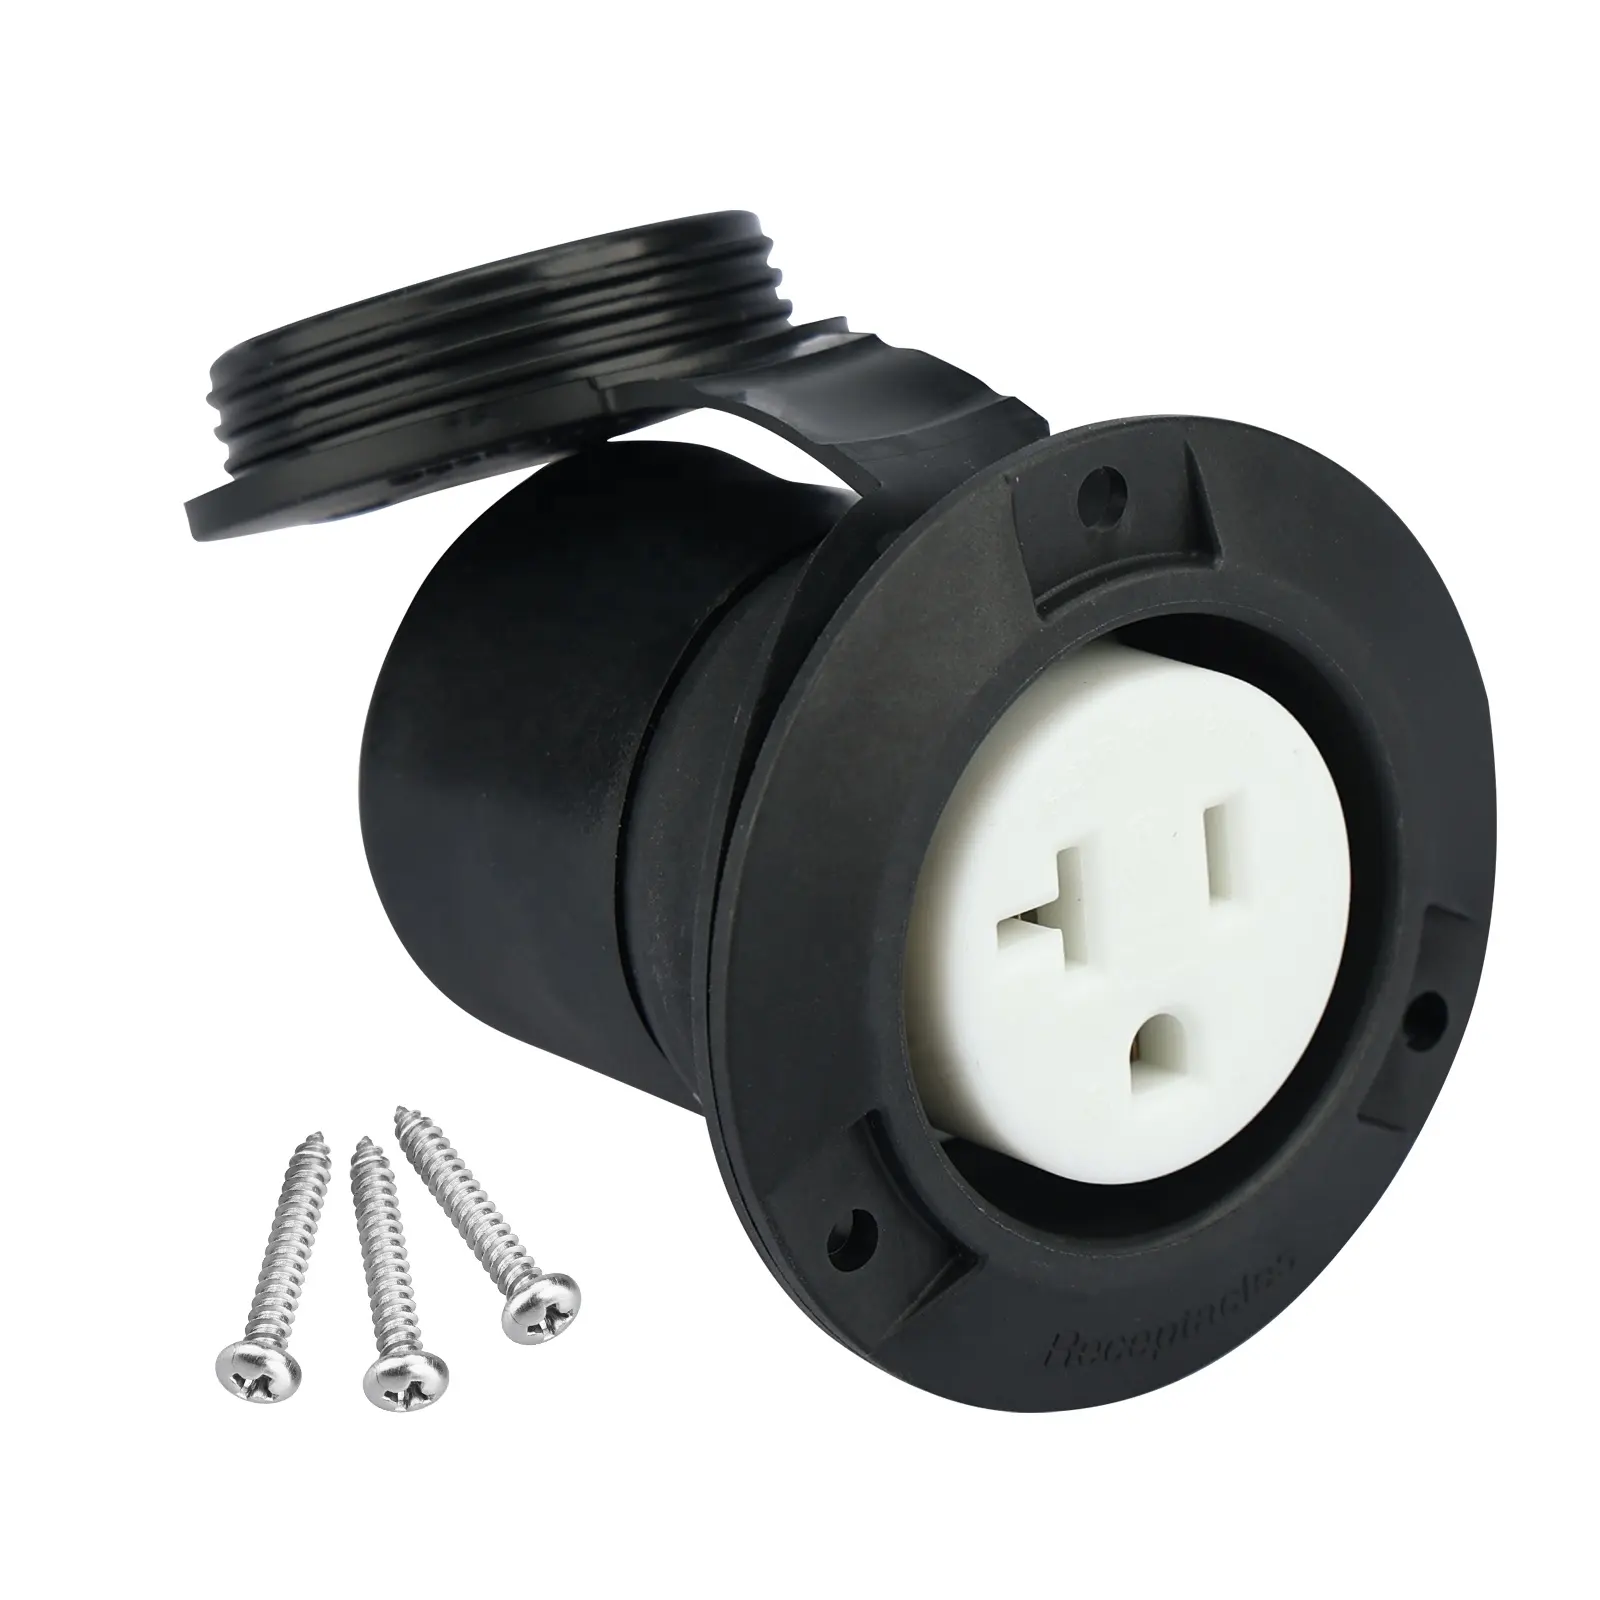 Straight Blade Flanged Outlet with Waterproof Cover, NEMA 6-20, 20A 250VAC, Commercial & Industrial Grade, 2 Pole, 3 Wire